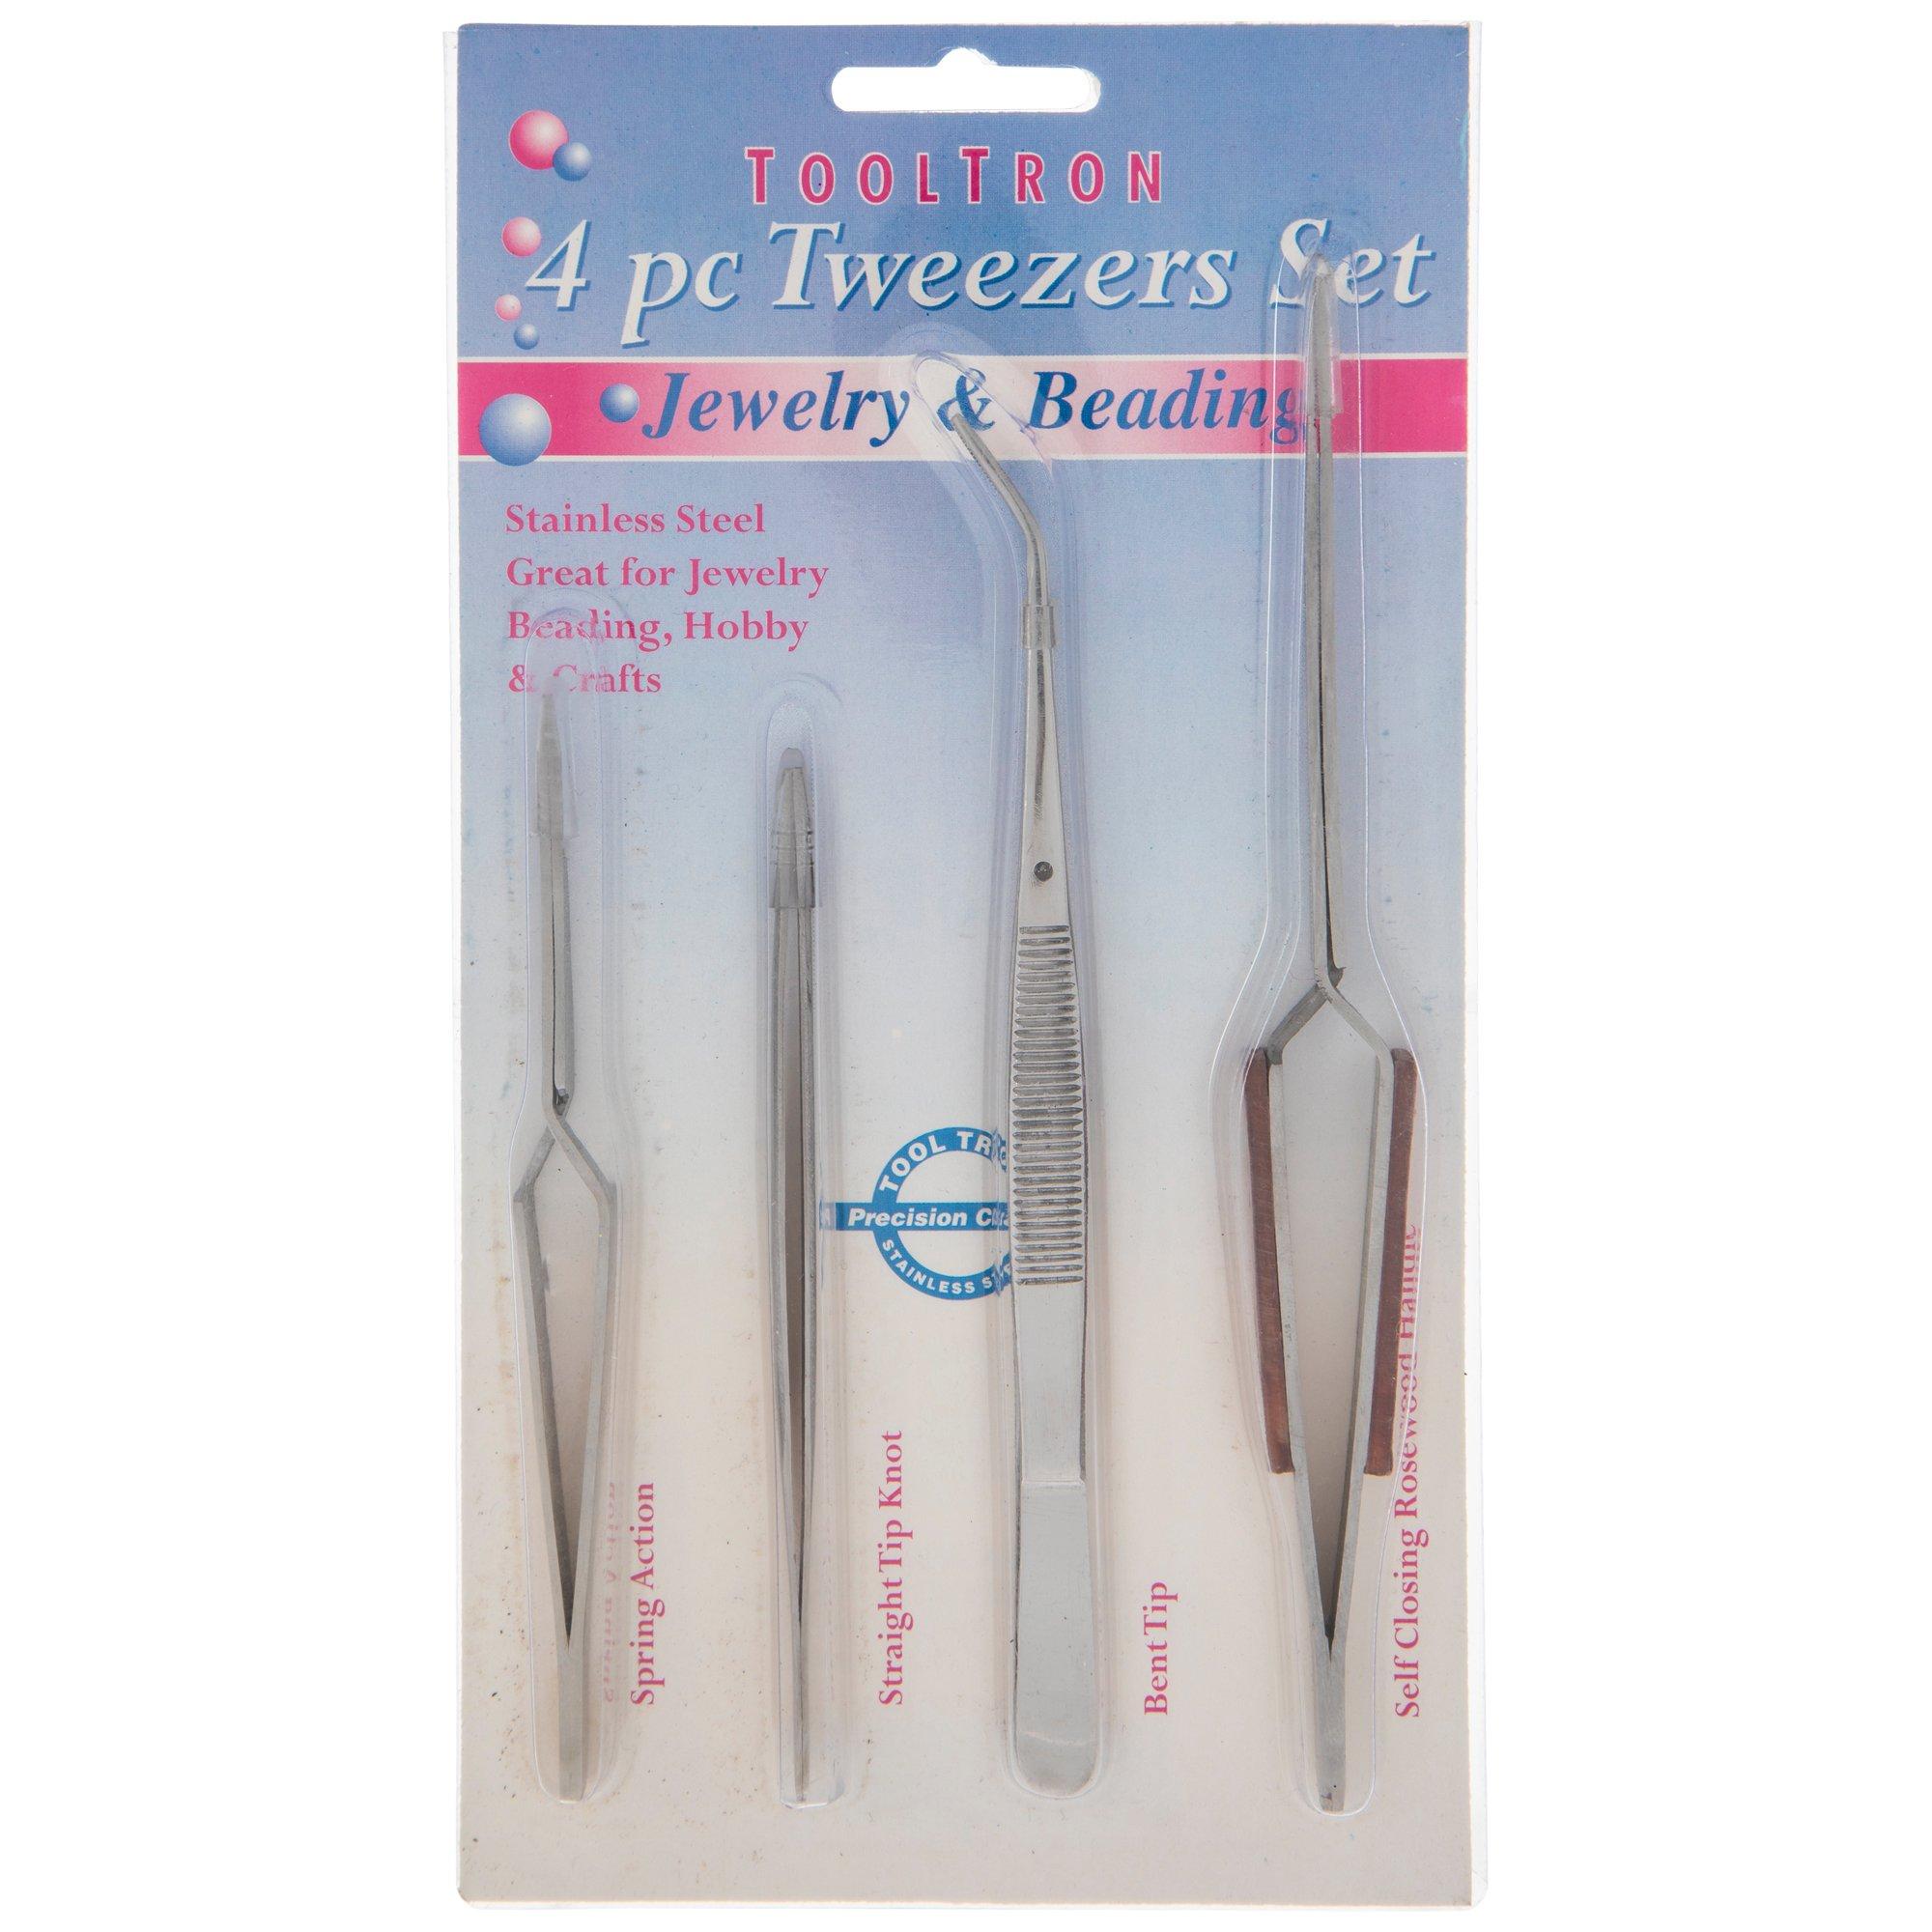 Hobby Craft Stainless Steel Tweezers with 1x2 Rat Tooth 4.75 Straight Tips Color Band